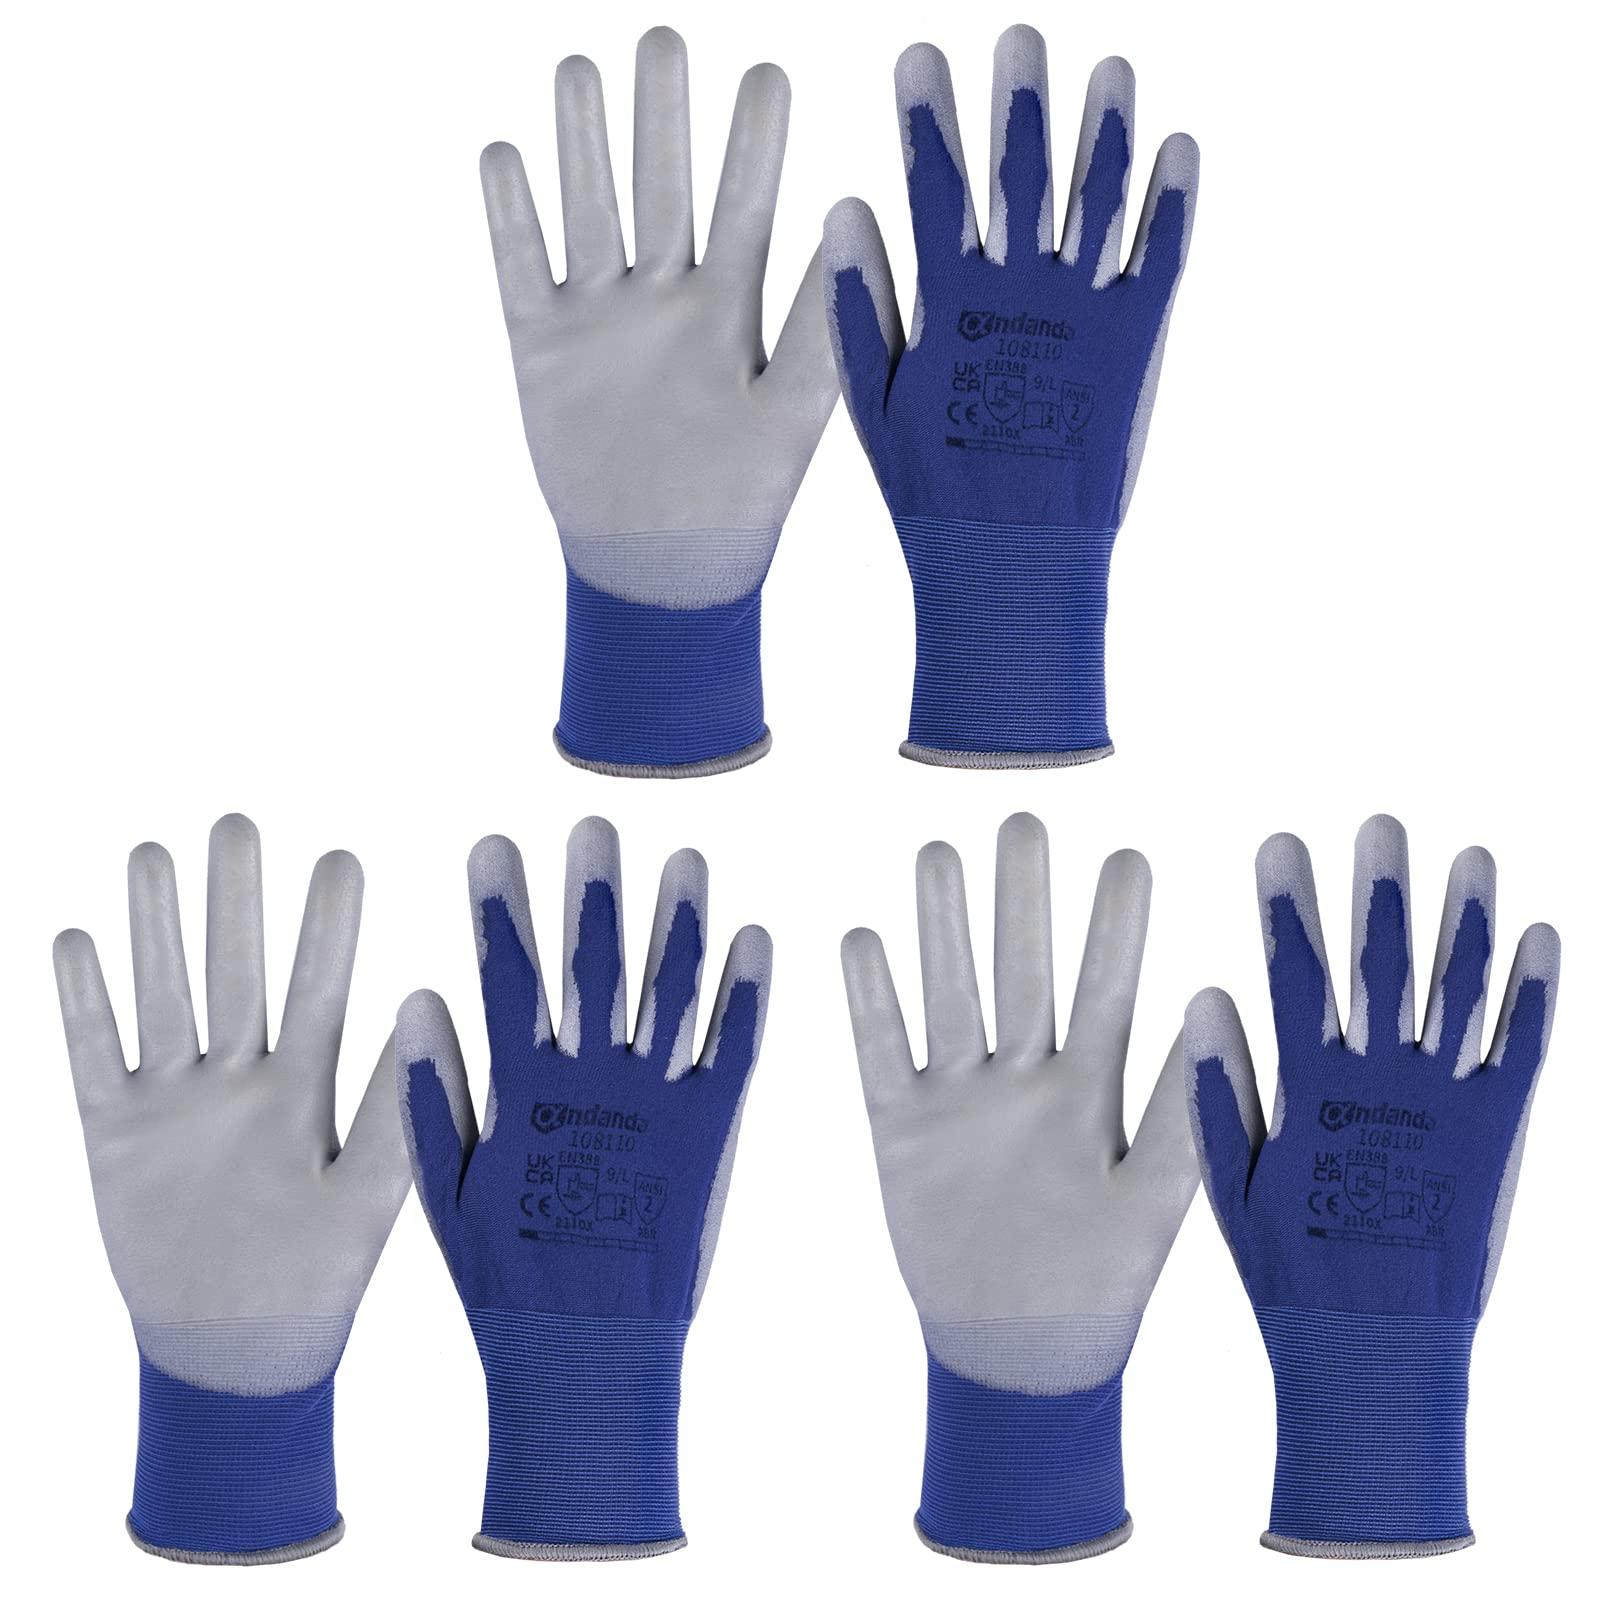 ANDANDA 12 Pairs Ultimate lightweight Precision Safety Work Gloves, PU Coated, 18gauge Seamless Knit Nylon Glove, Ideal Work Gloves Men for Packaging, Inspection, Transport and Delivery, Blue/Medium 0